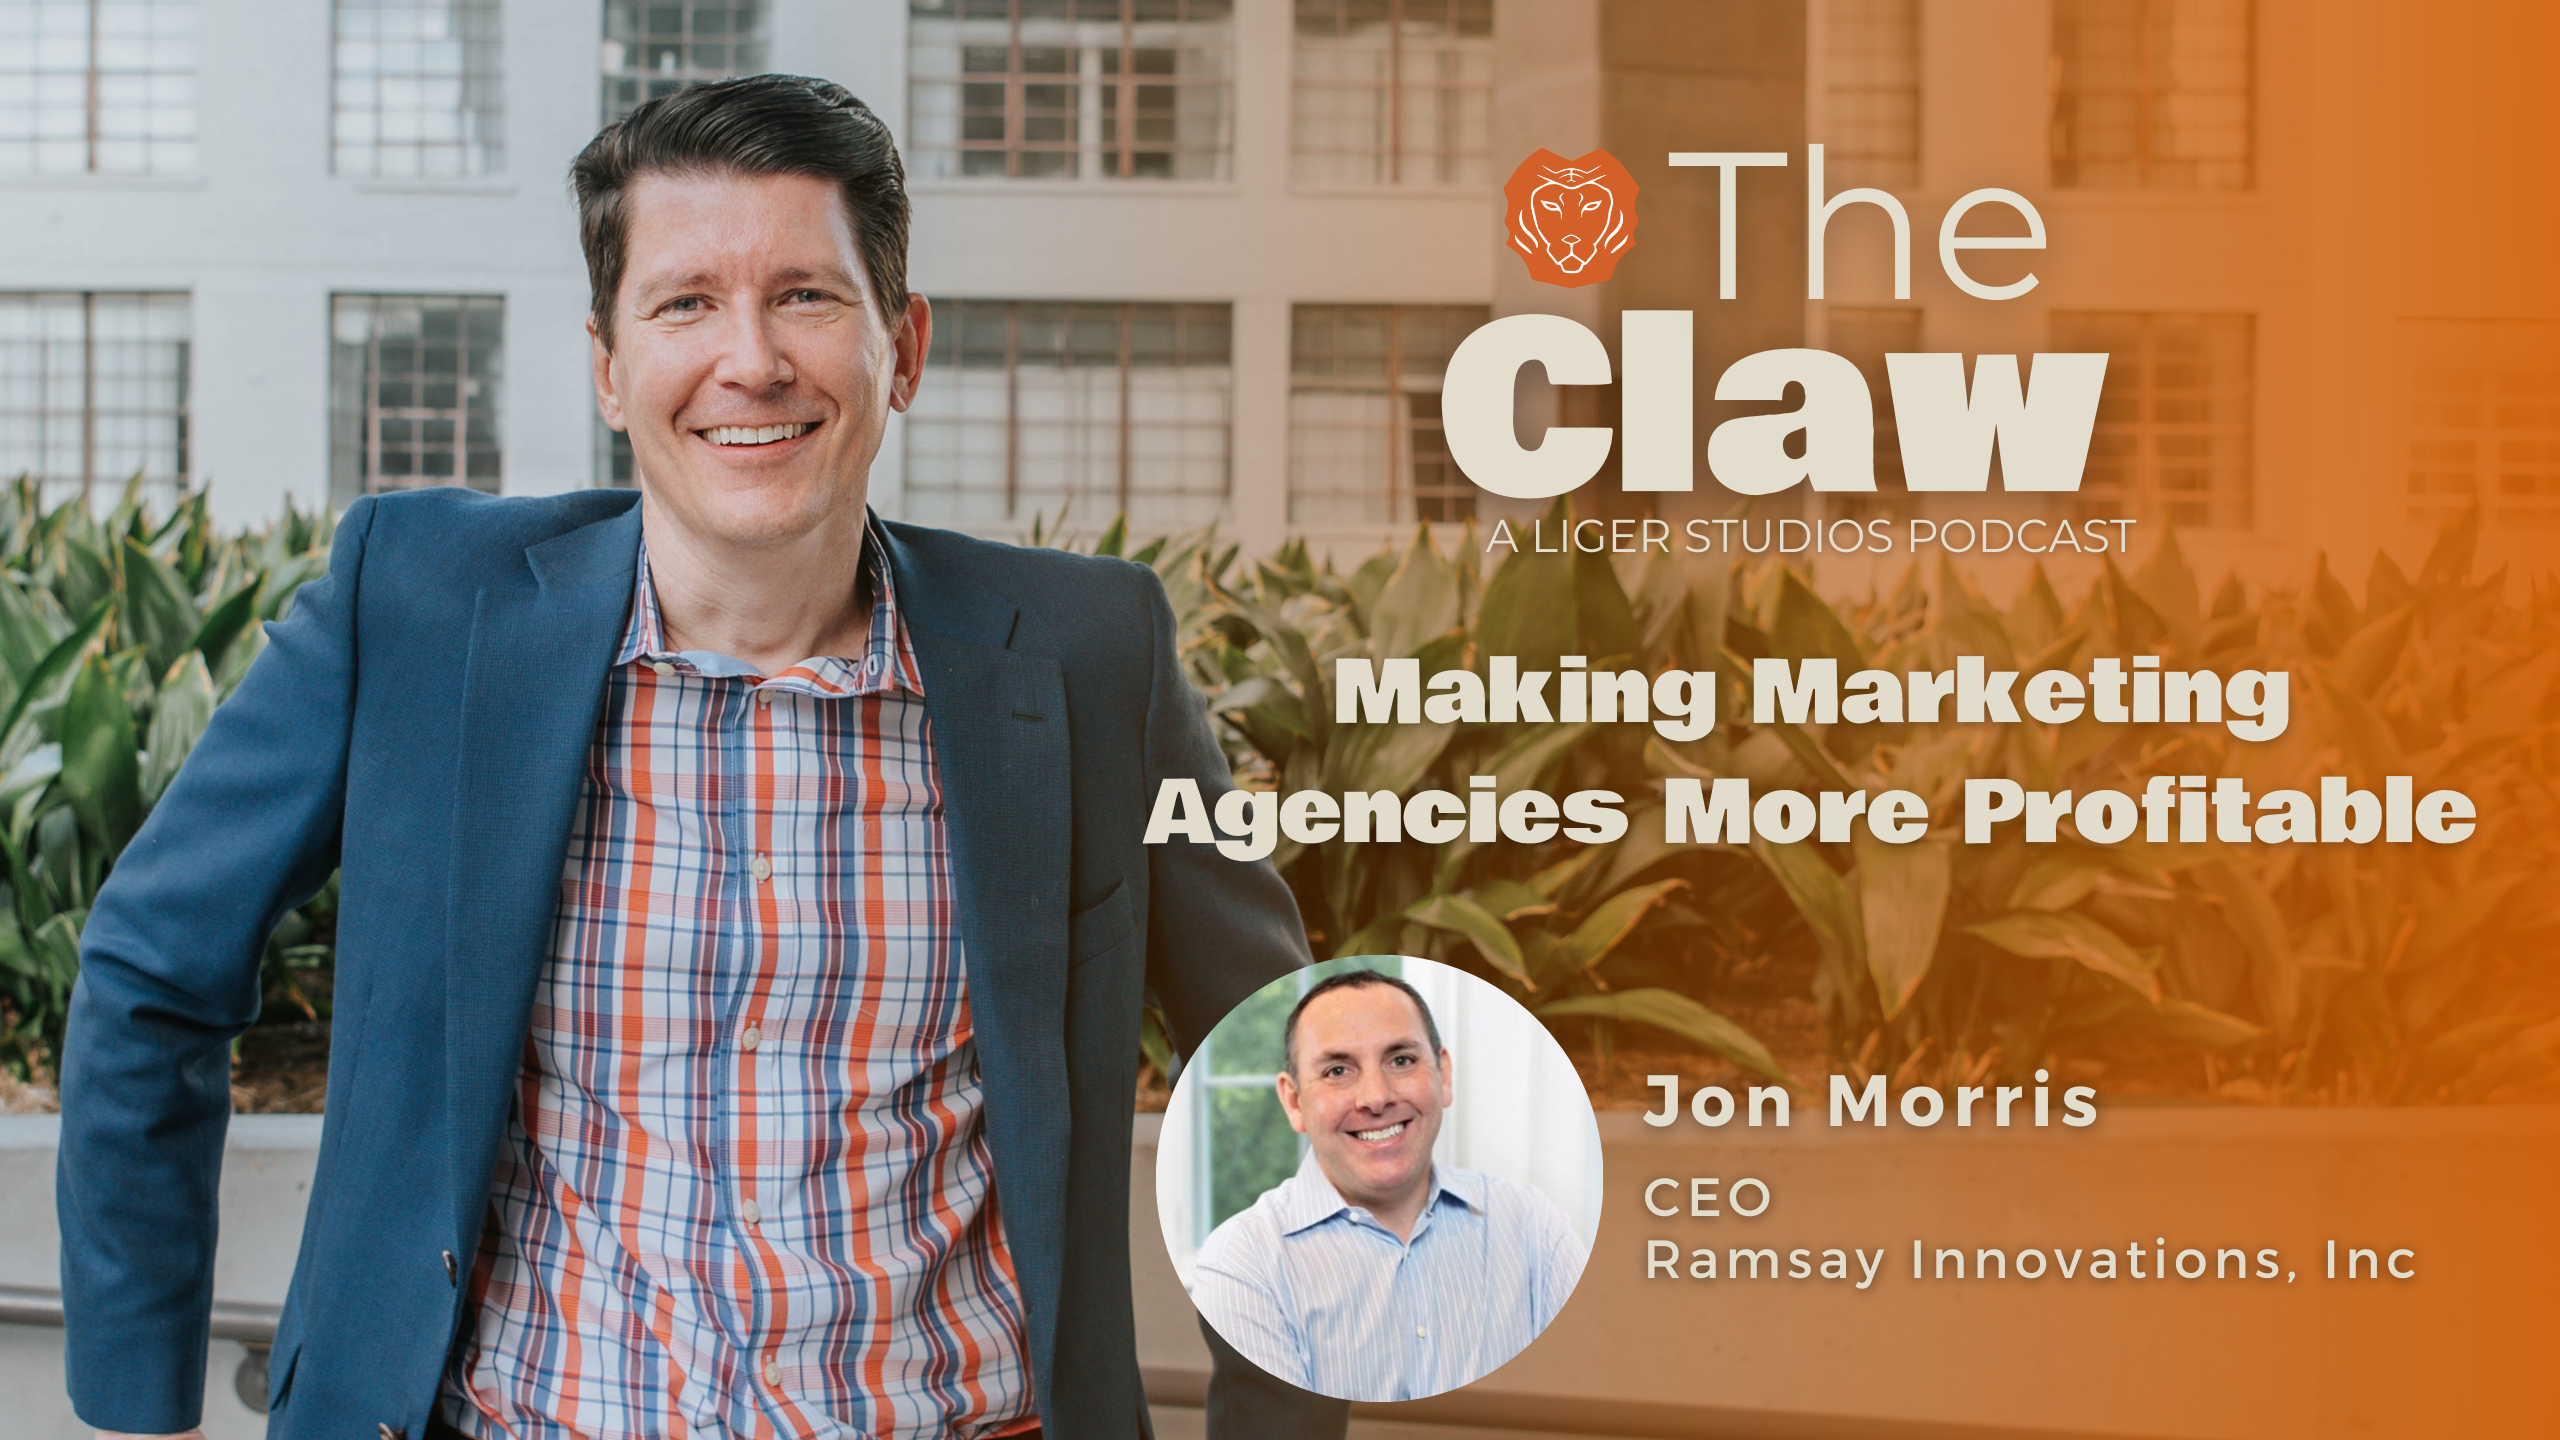 The Claw Podcast: Making Marketing Agencies More Profitable with Jon Morris